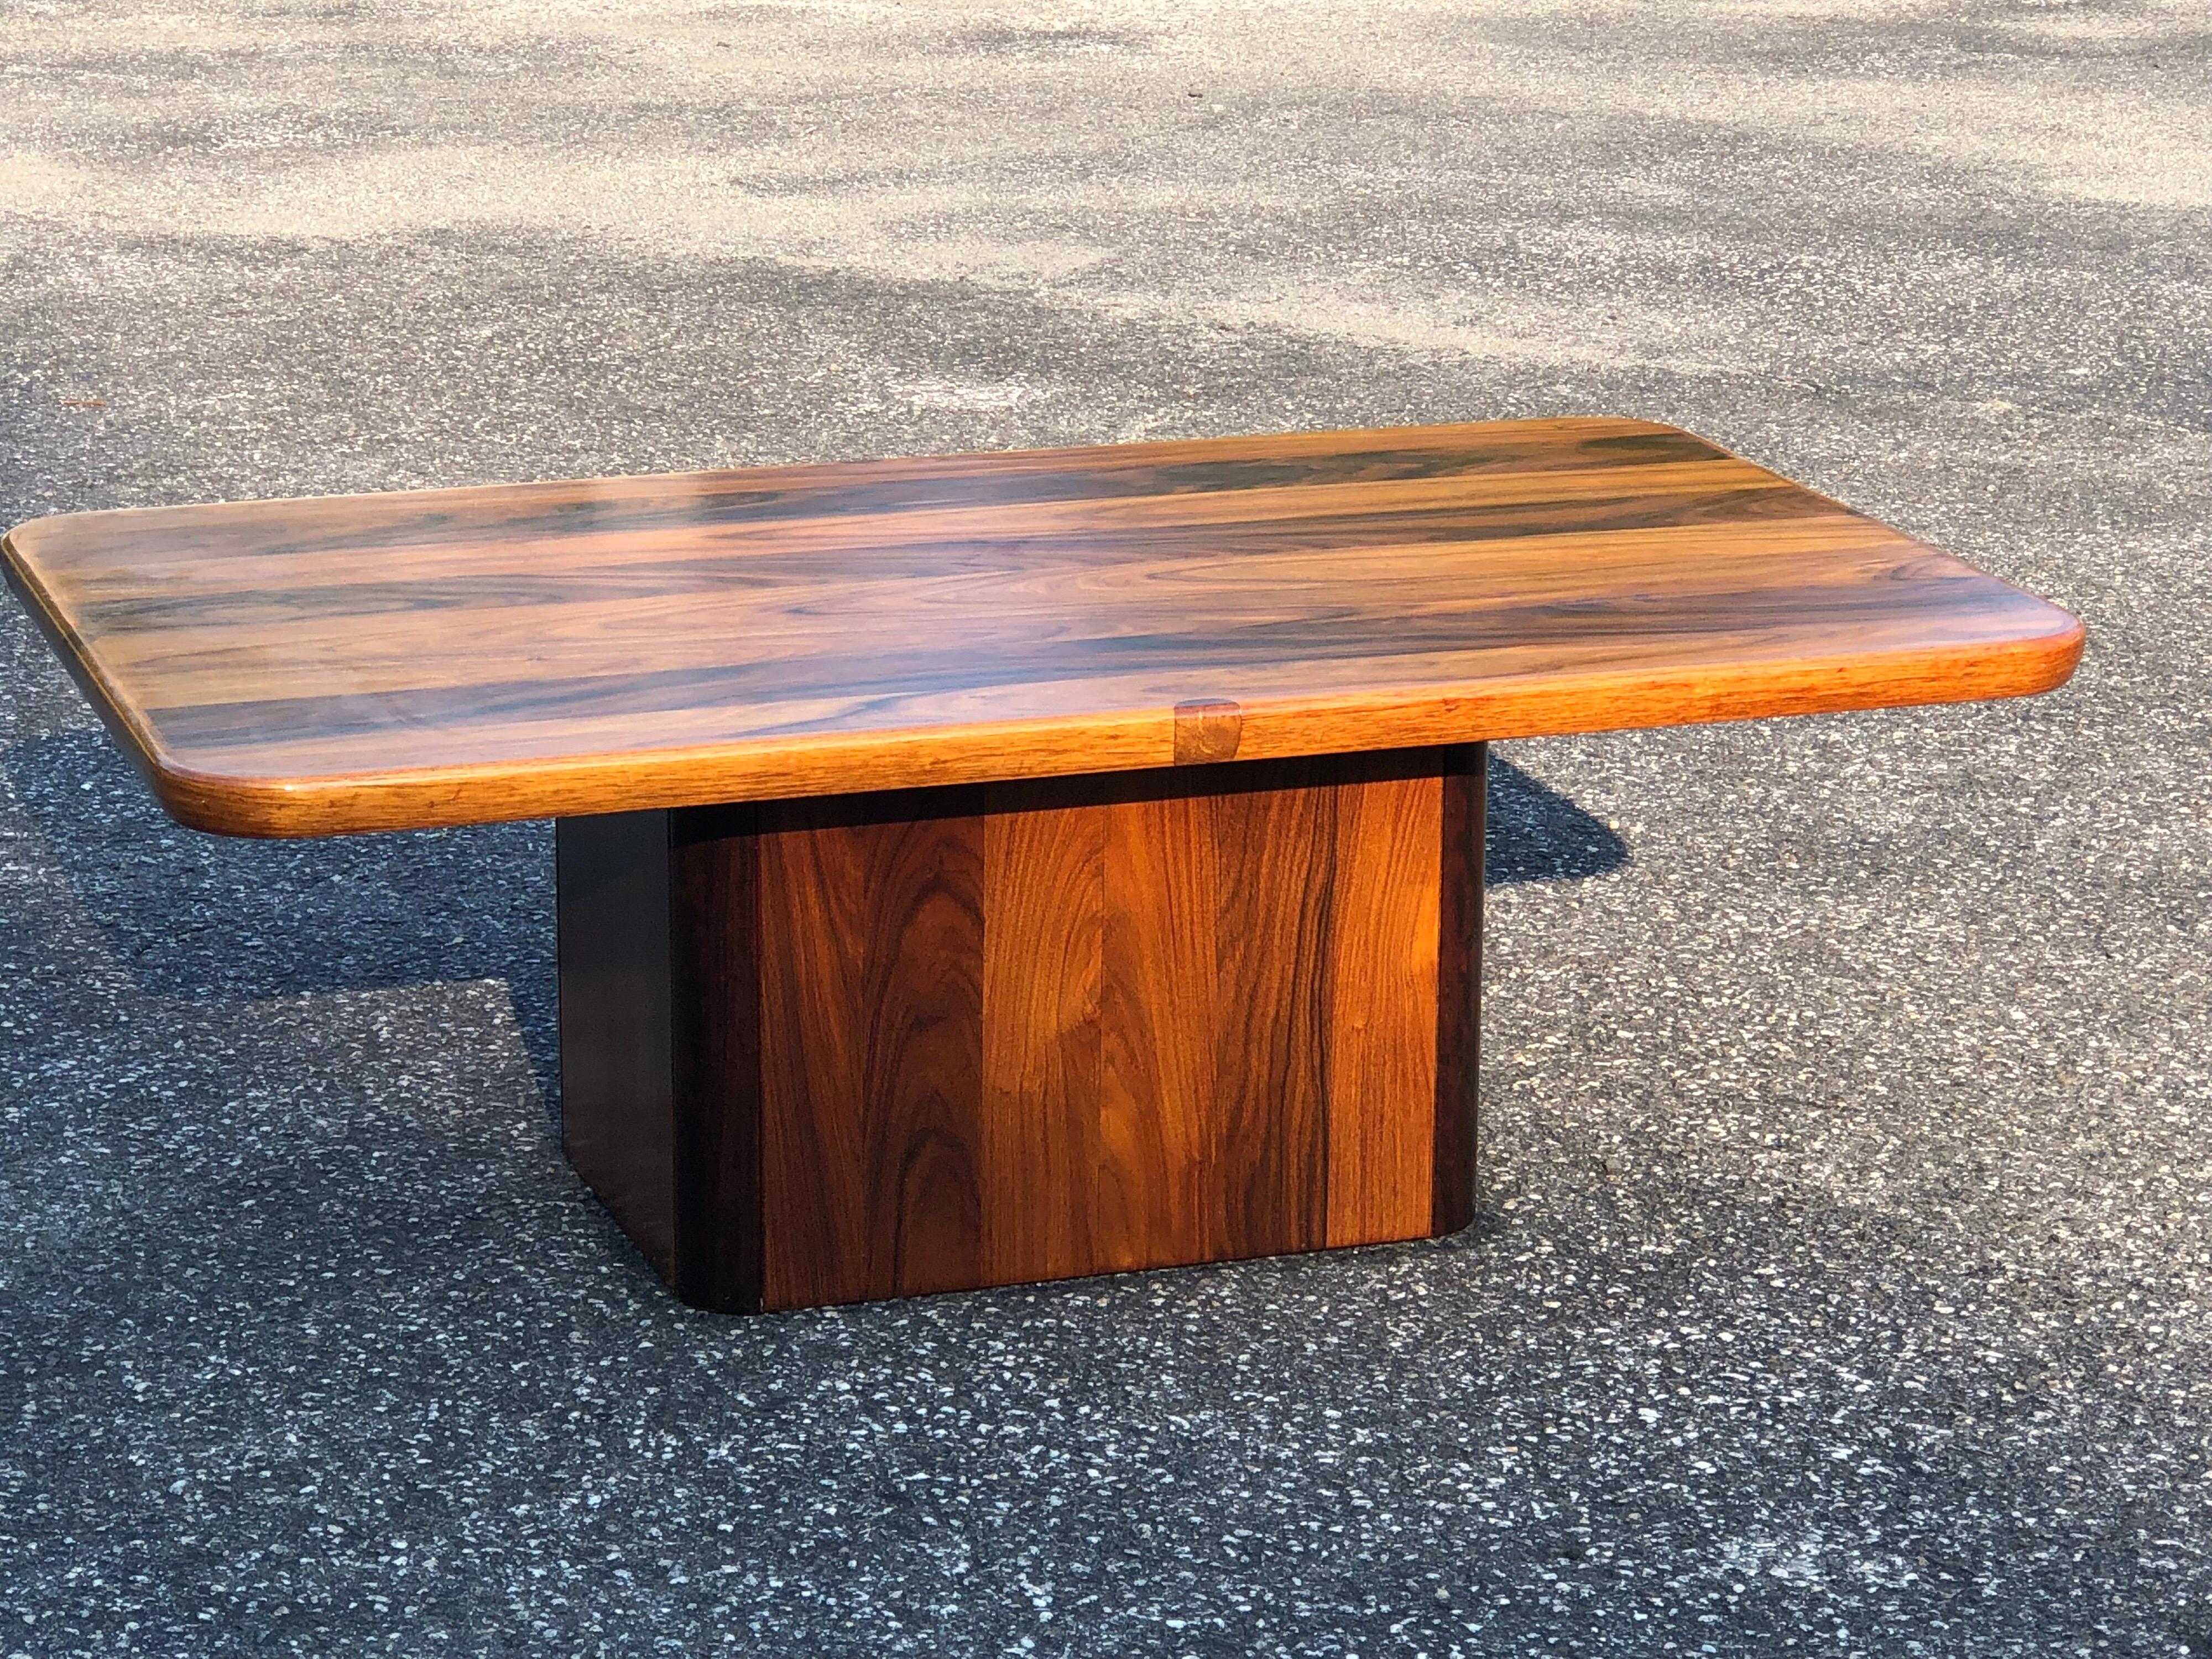 Midcentury Danish rosewood coffee table by Jensen Frokjaer. Minimalist lines and rich, organic wood grains make up this perfect sized coffee table. Its rounded edges and block base make it kid and pet friendly. It is solid, very sturdy and timeless